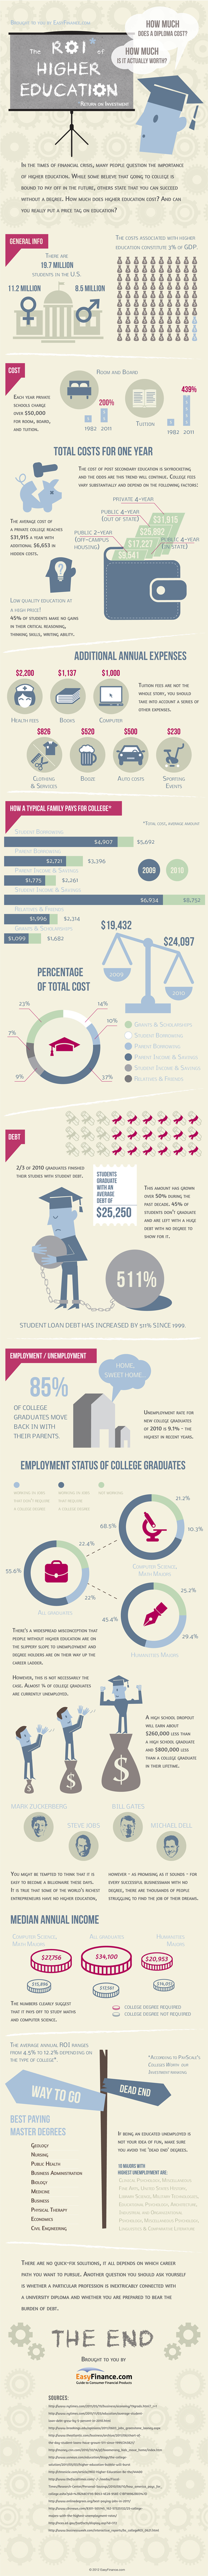 The Importance of Higher Education Infographic